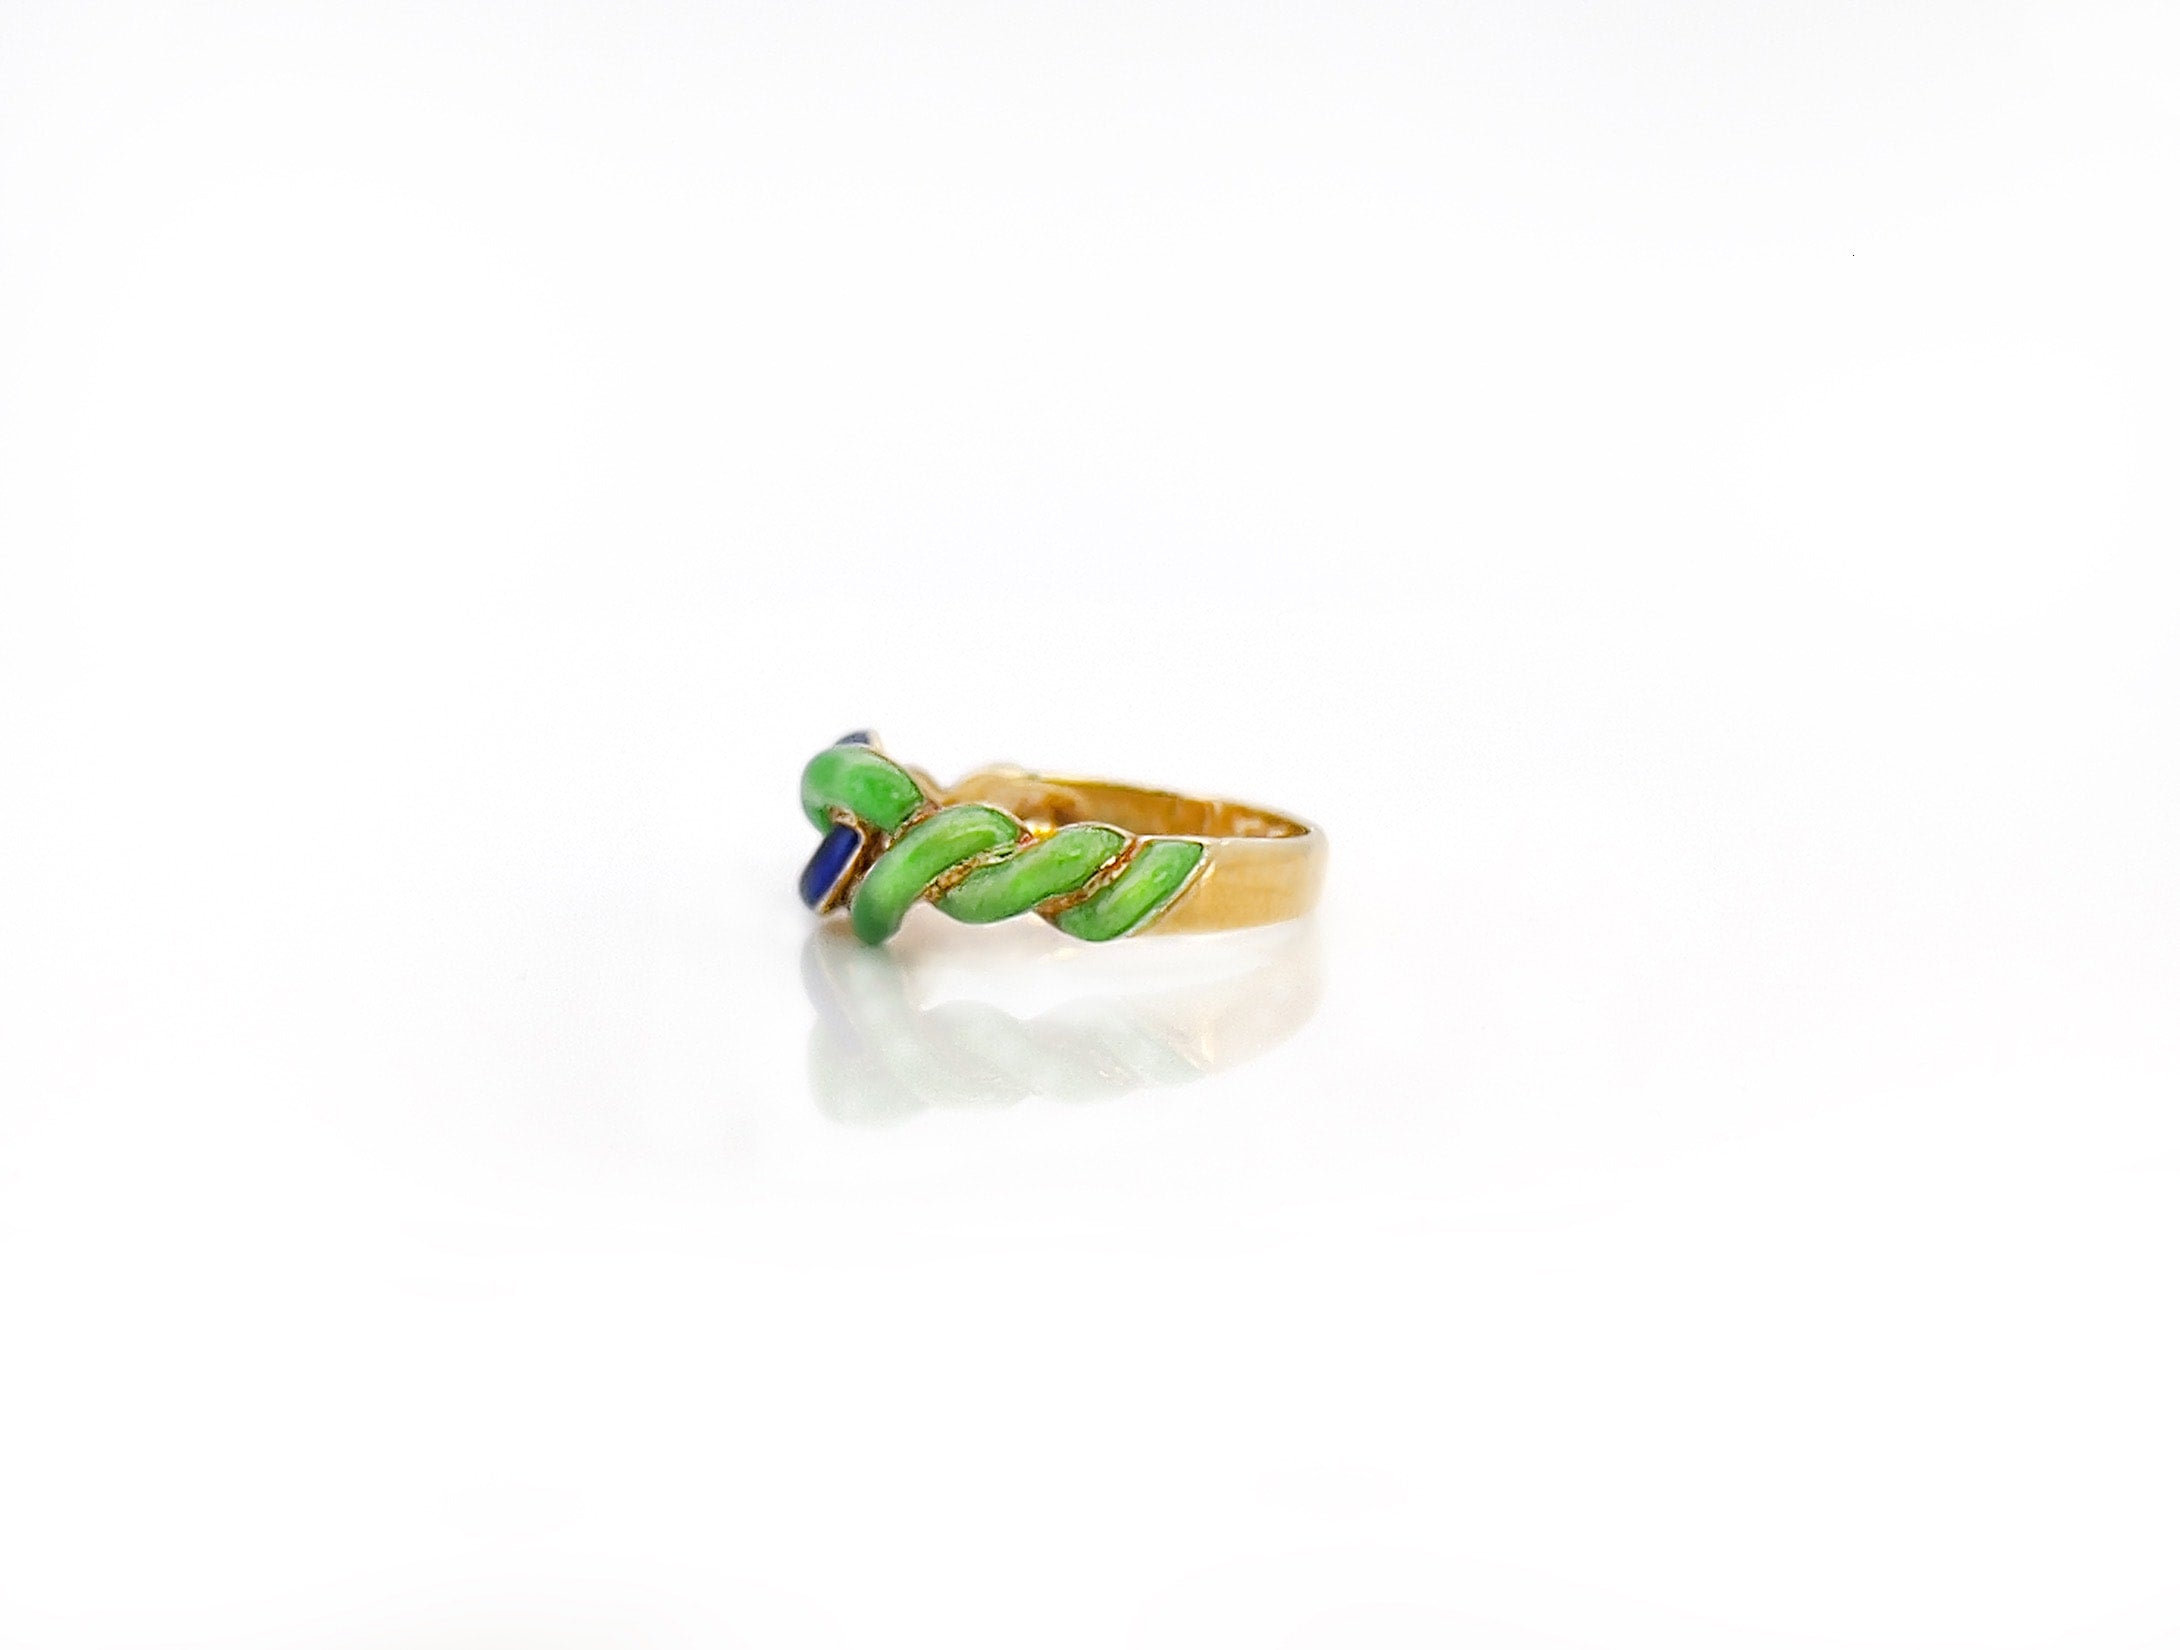 Vintage Blue and Green Enamel Gold Knot Ring, Size 7.75